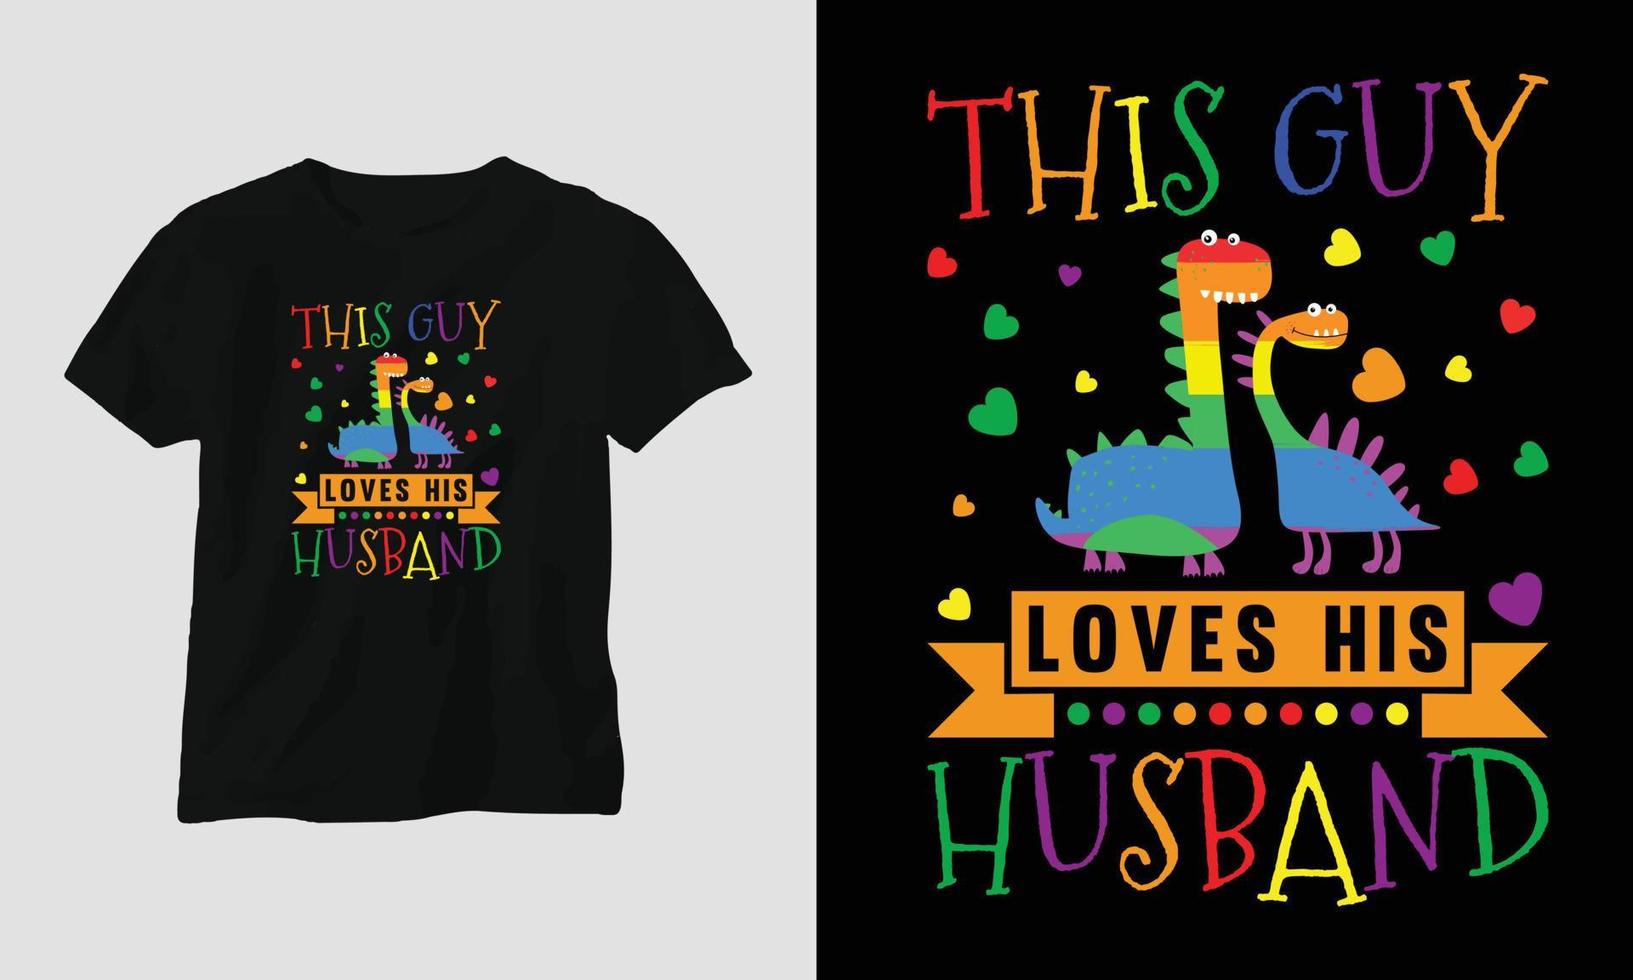 This guy loves his husband - LGBT T-shirt and apparel design. Vector print, typography, poster, emblem, festival, pride, couple